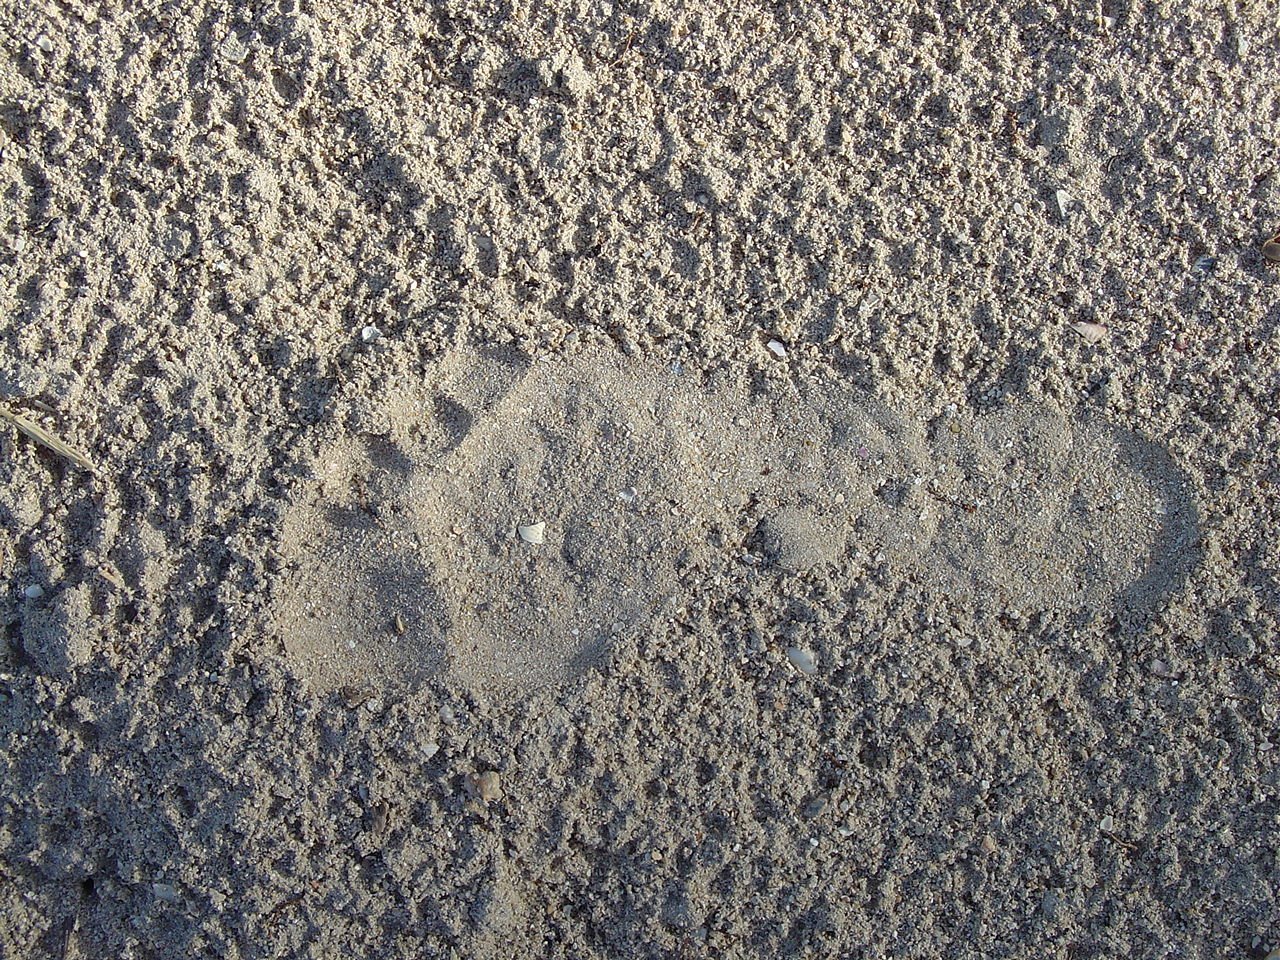 an animal tracks in the sand that is on the beach